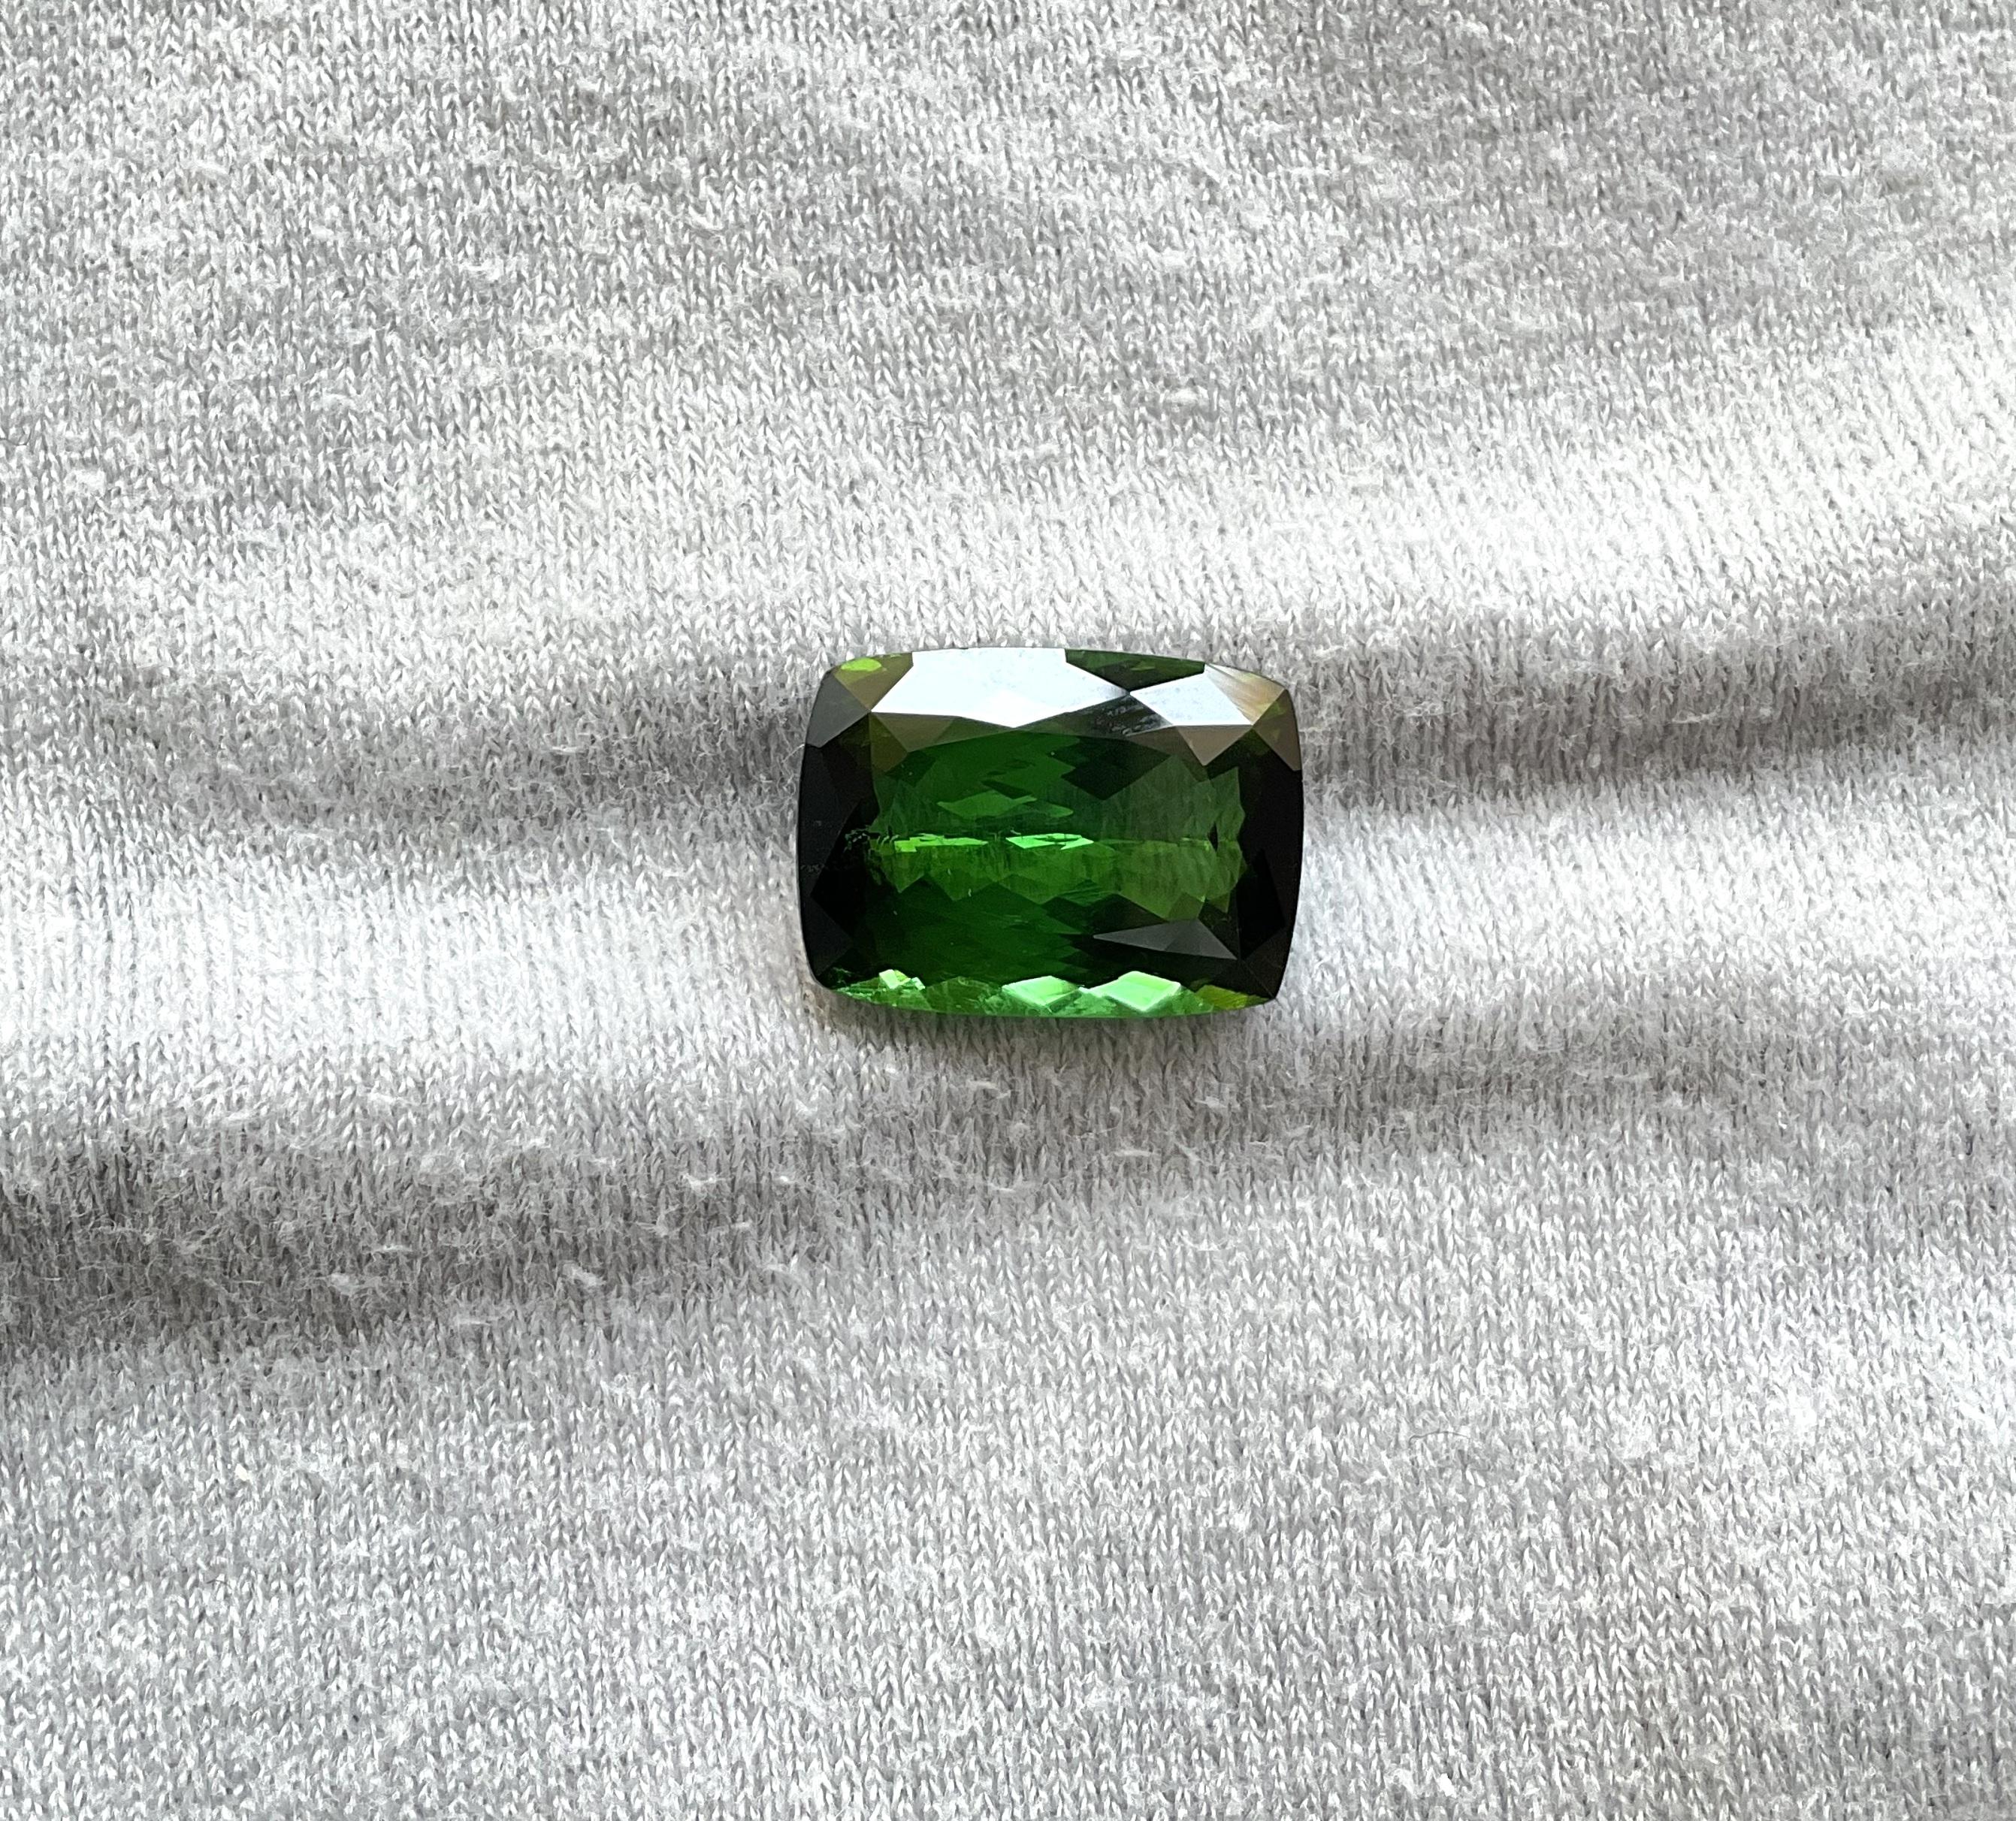 9.52 carats Nigeria green tourmaline Top Quality cushion Cut stone natural Gem In New Condition For Sale In Jaipur, RJ